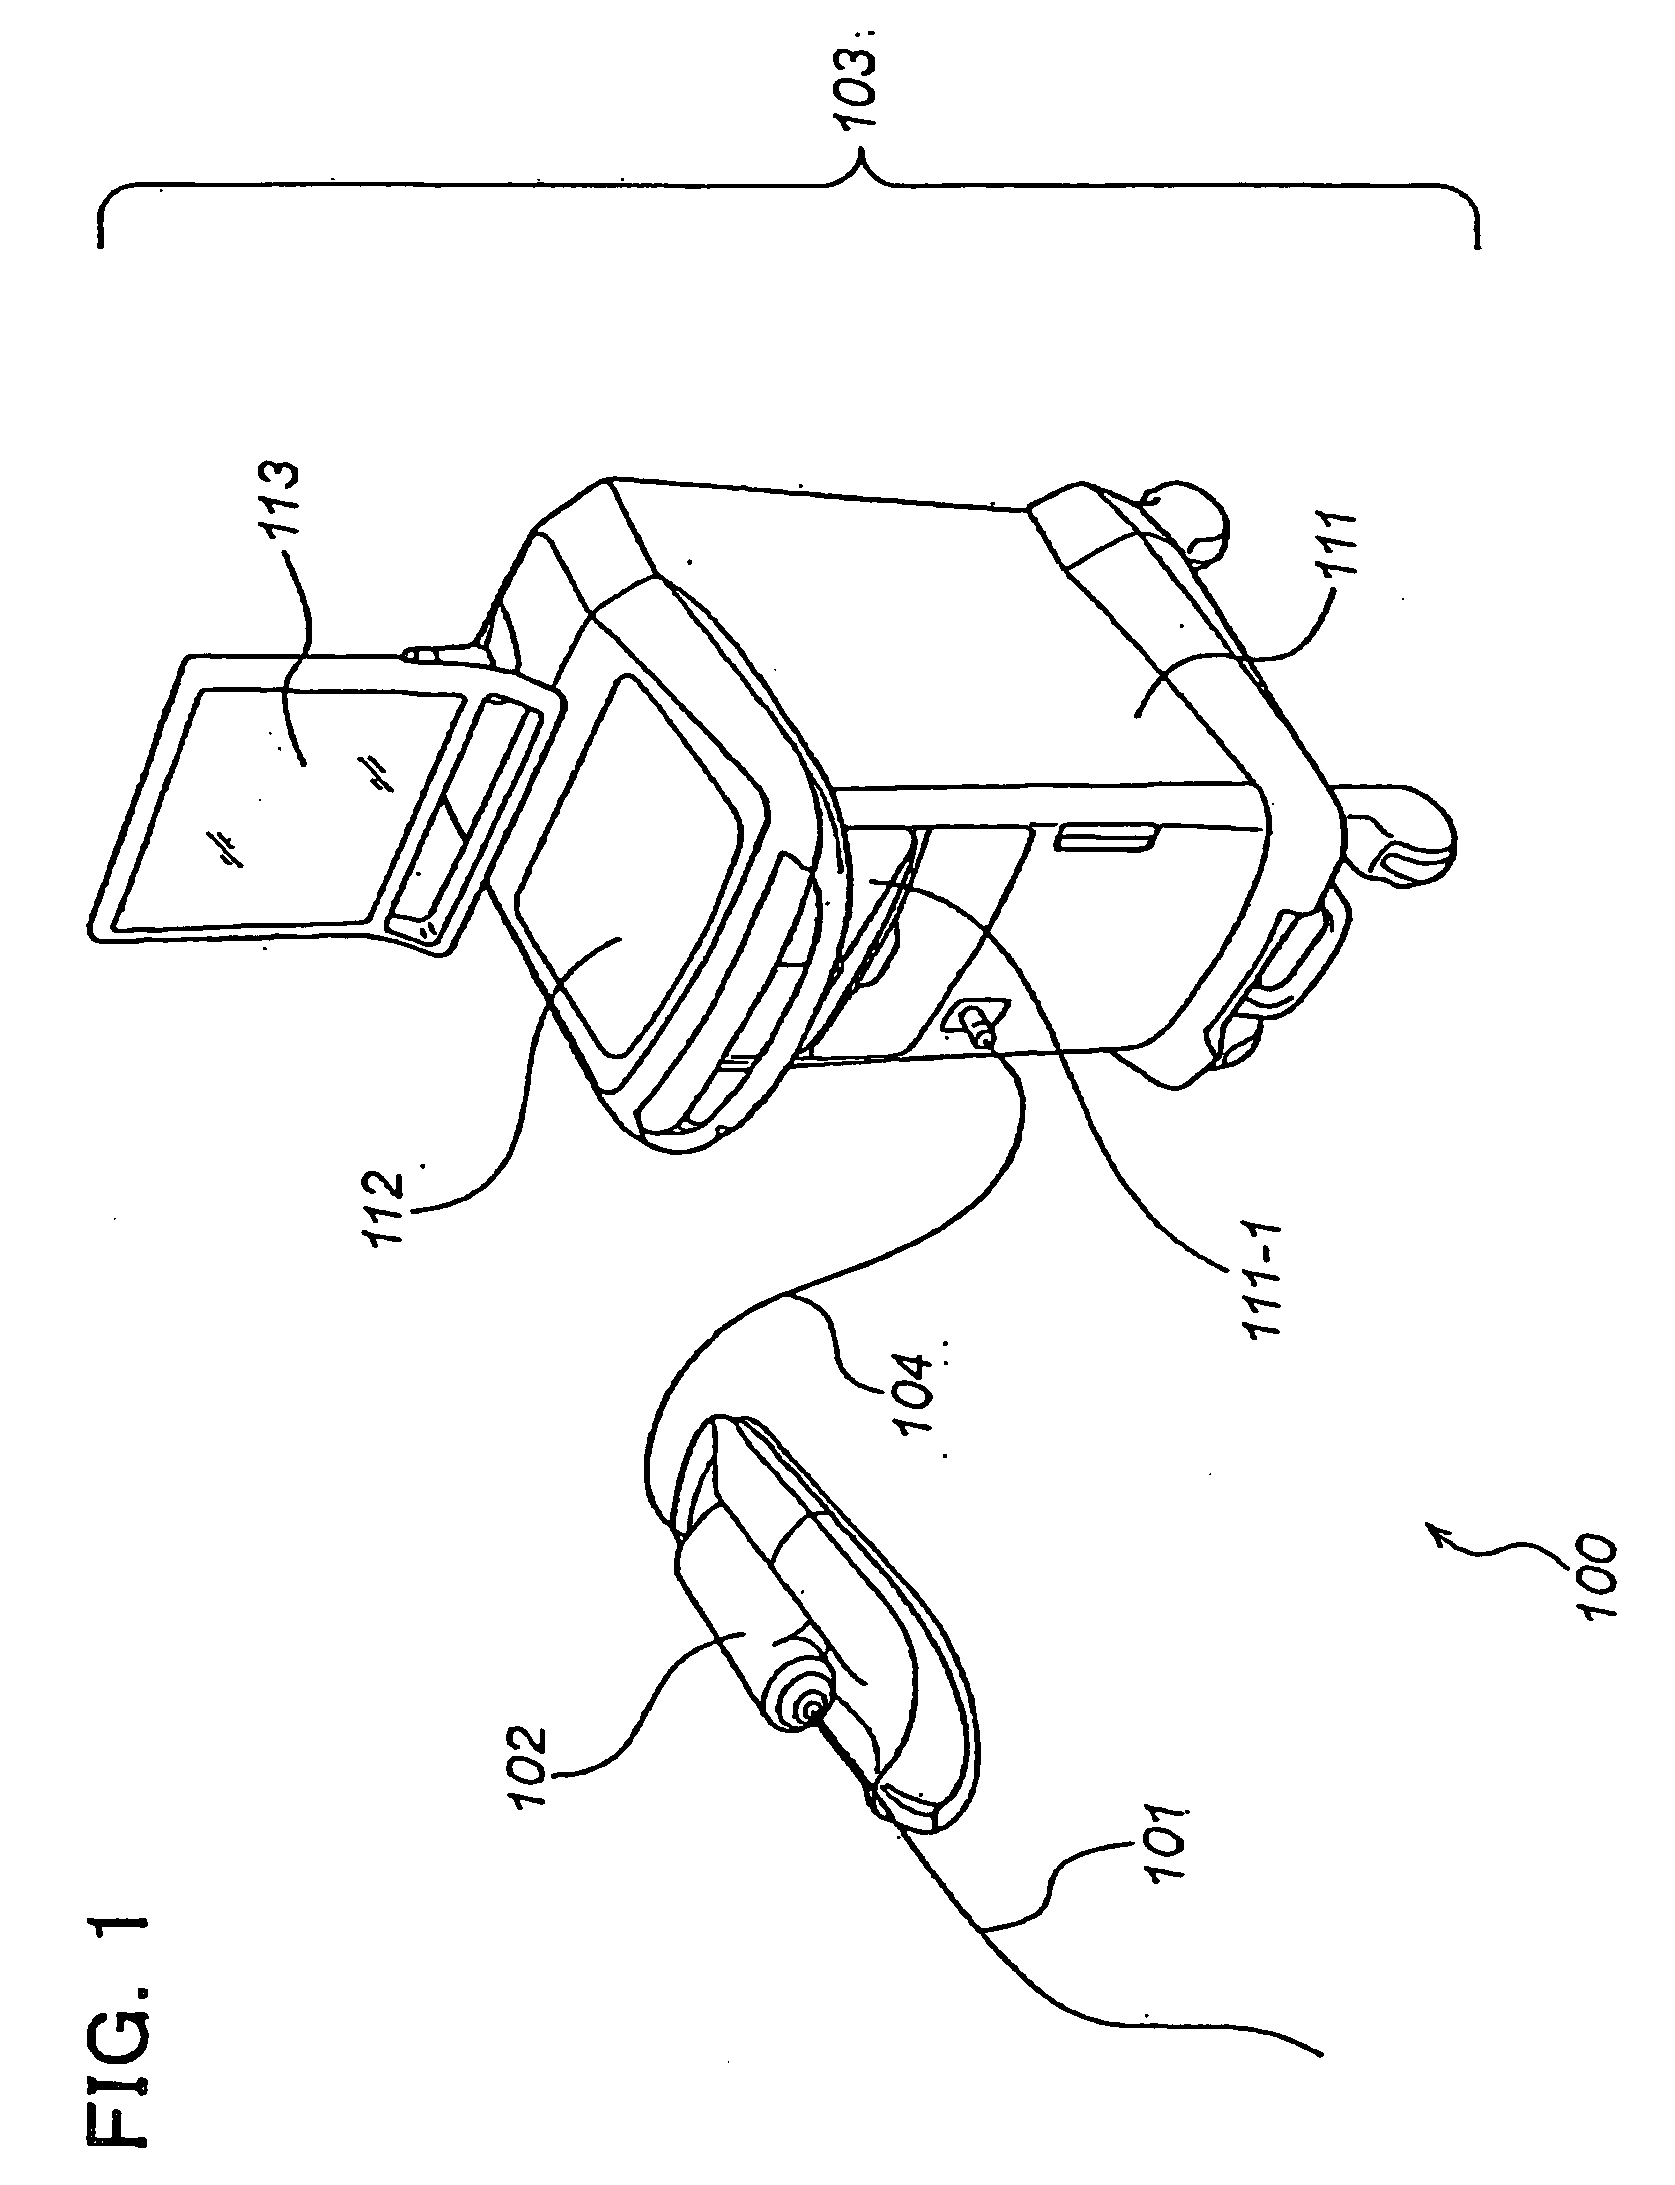 Image diagnostic system and apparatus, and processing method therefor